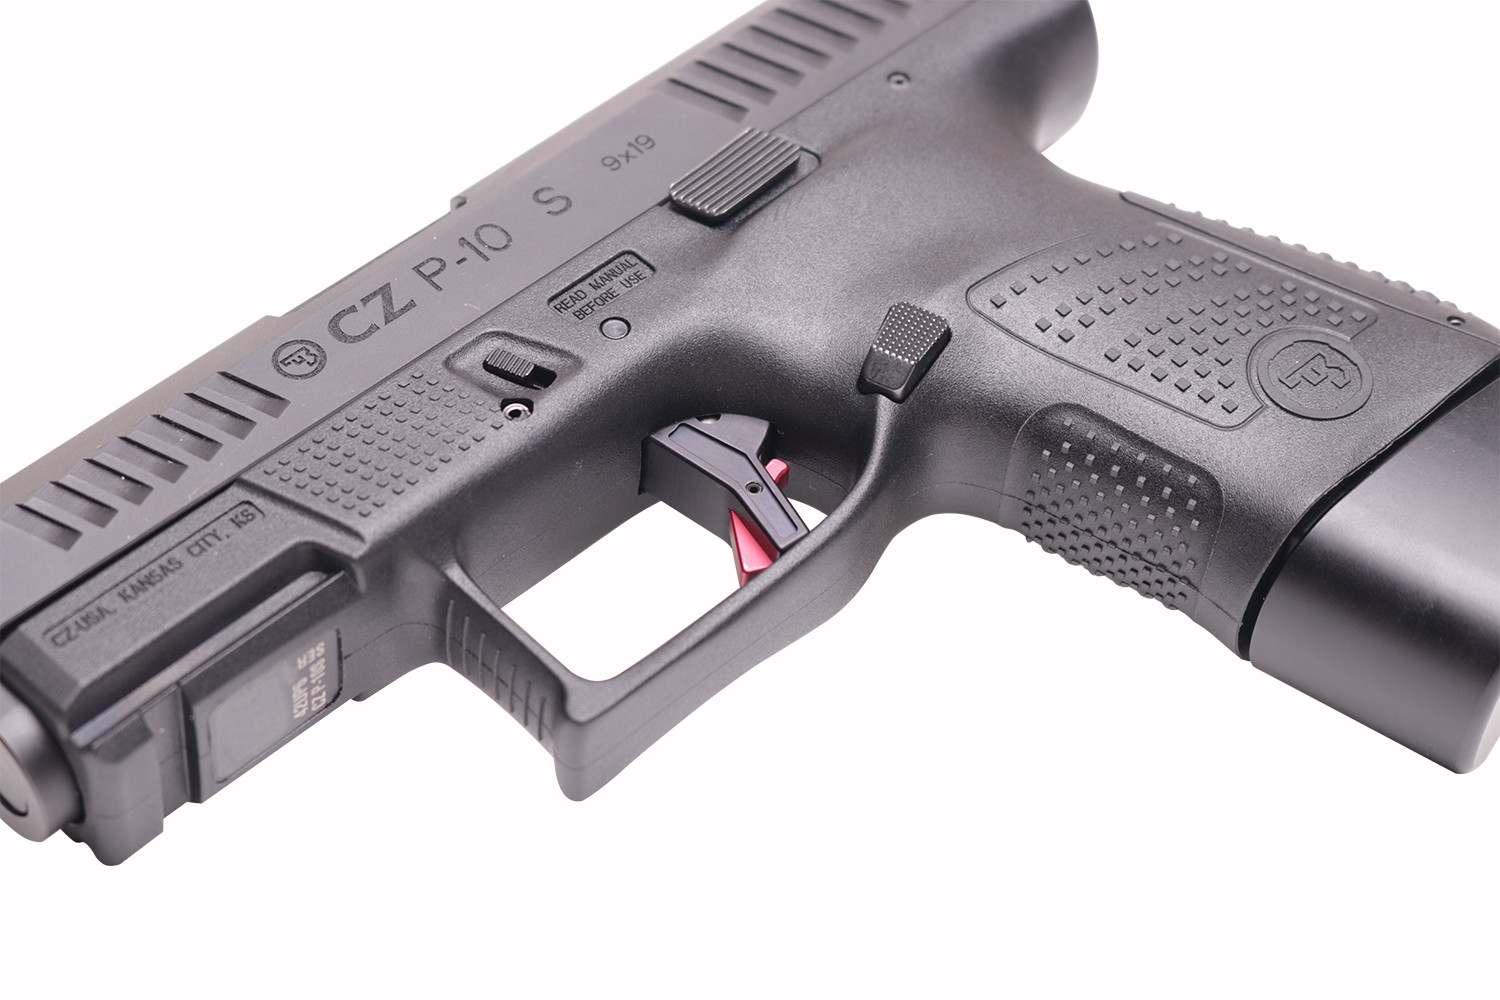 CZ P10S 9mm Pistol  For Sale | In Stock Now, Don't Miss Out! - Tactical Firearms And Archery